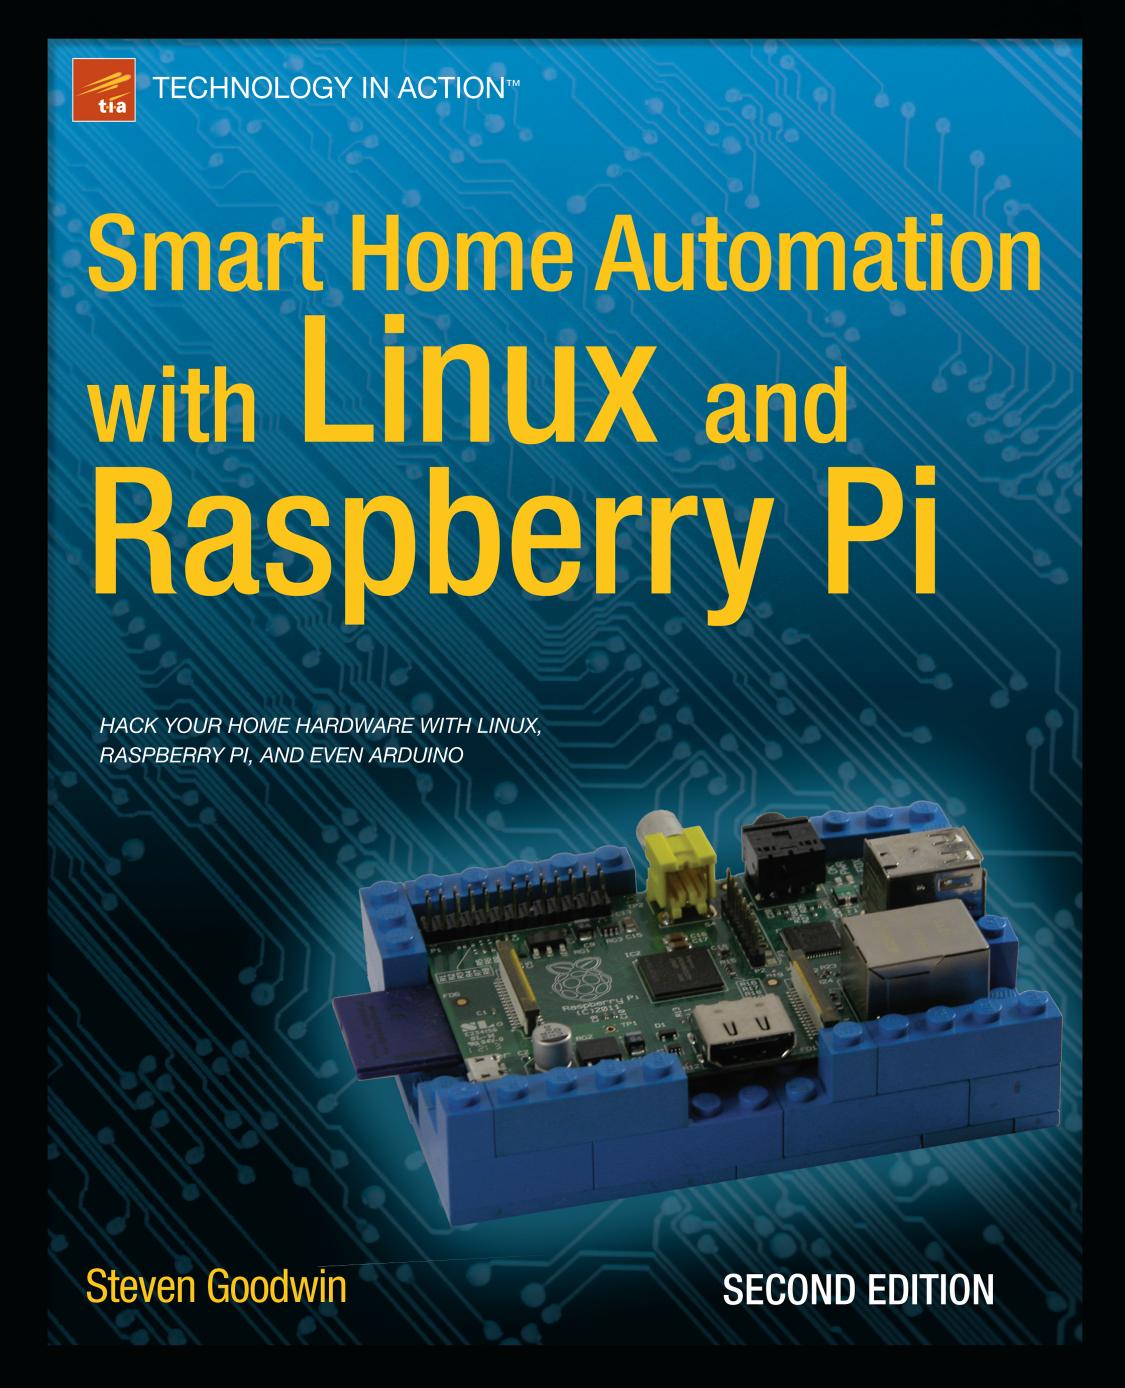 Smart Home Automation with Linux and Raspberry Pi by Steven Goodwin